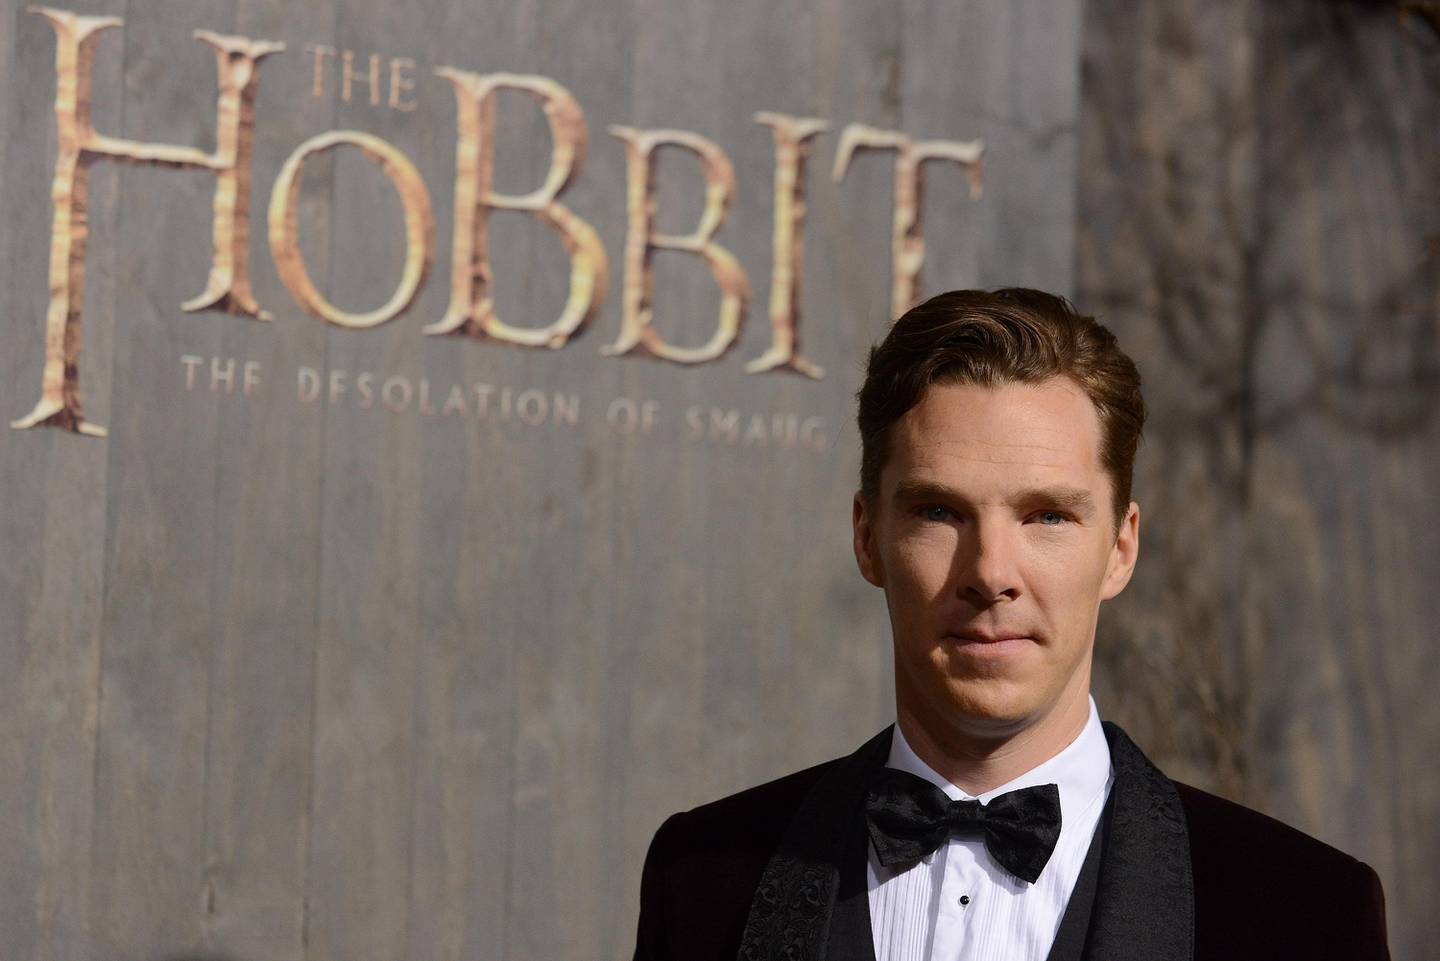 Actor Benedict Cumberbatch arrives at the Los Angeles premiere of "The Hobbit: The Desolation of Smaug" at the Dolby Theatre on Monday, Dec. 2, 2013. (Photo by Jordan Strauss/Invision/AP)